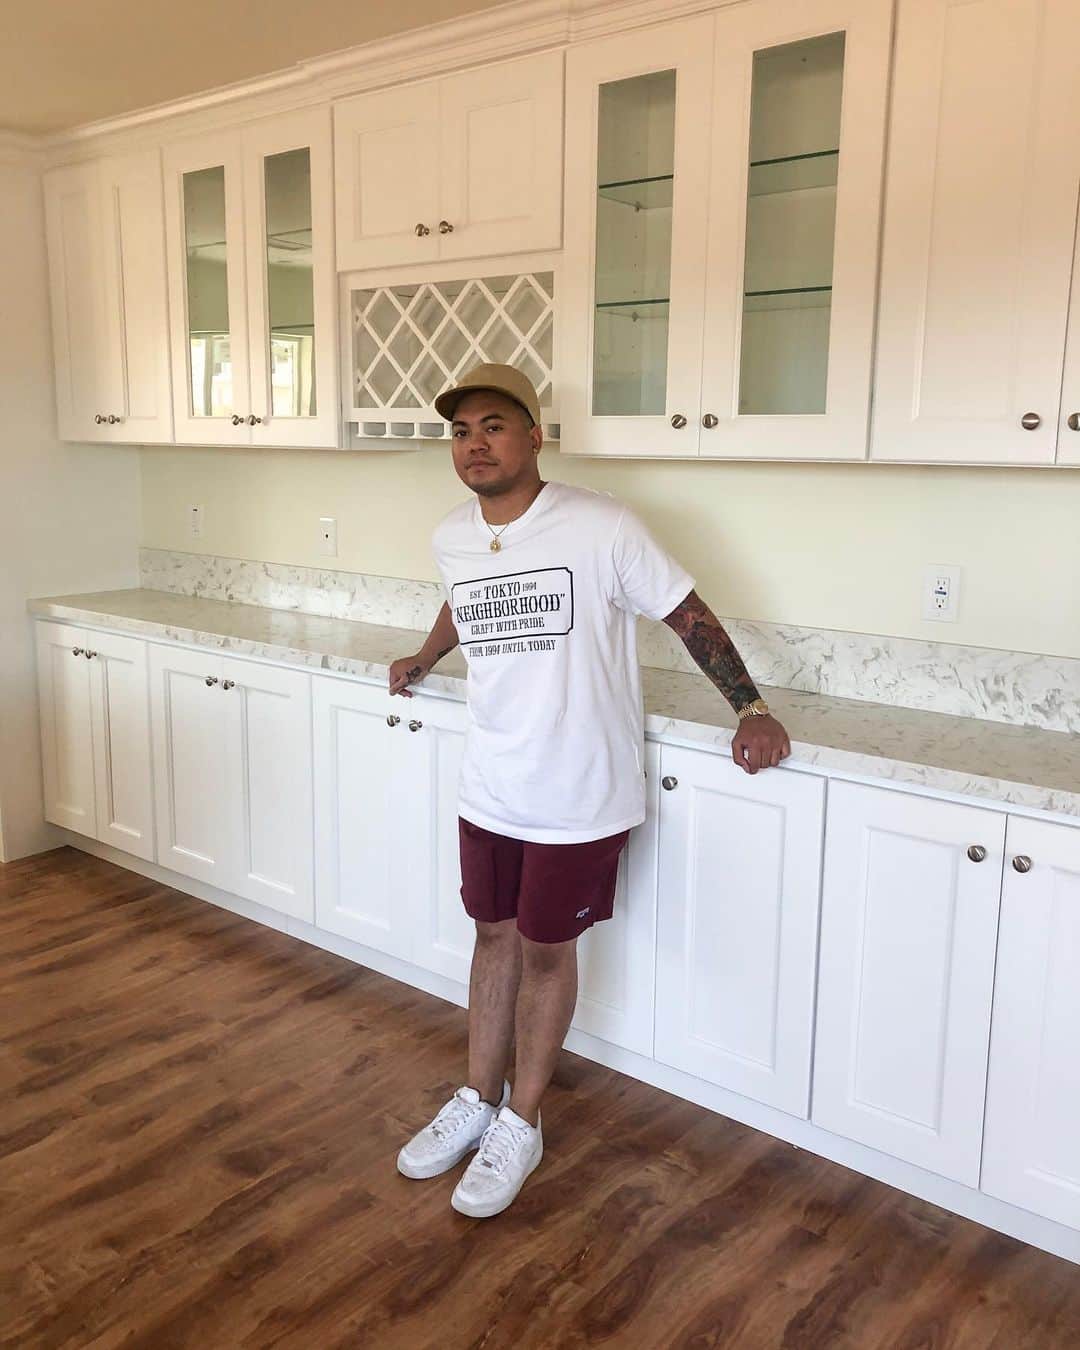 Jeff Bernatのインスタグラム：「One of my biggest goals was to buy a house before turning 30. I had to work smart, stay disciplined and play my cards right. I turn 30 in 4 months and am about to get the keys to my brand new home in beautiful sunny Los Angeles. If a small town kid from Reno, NV that dropped out of college, quit his job and just wanted to make music can do this.. you can do it too. I'm beyond blessed. God is good.」